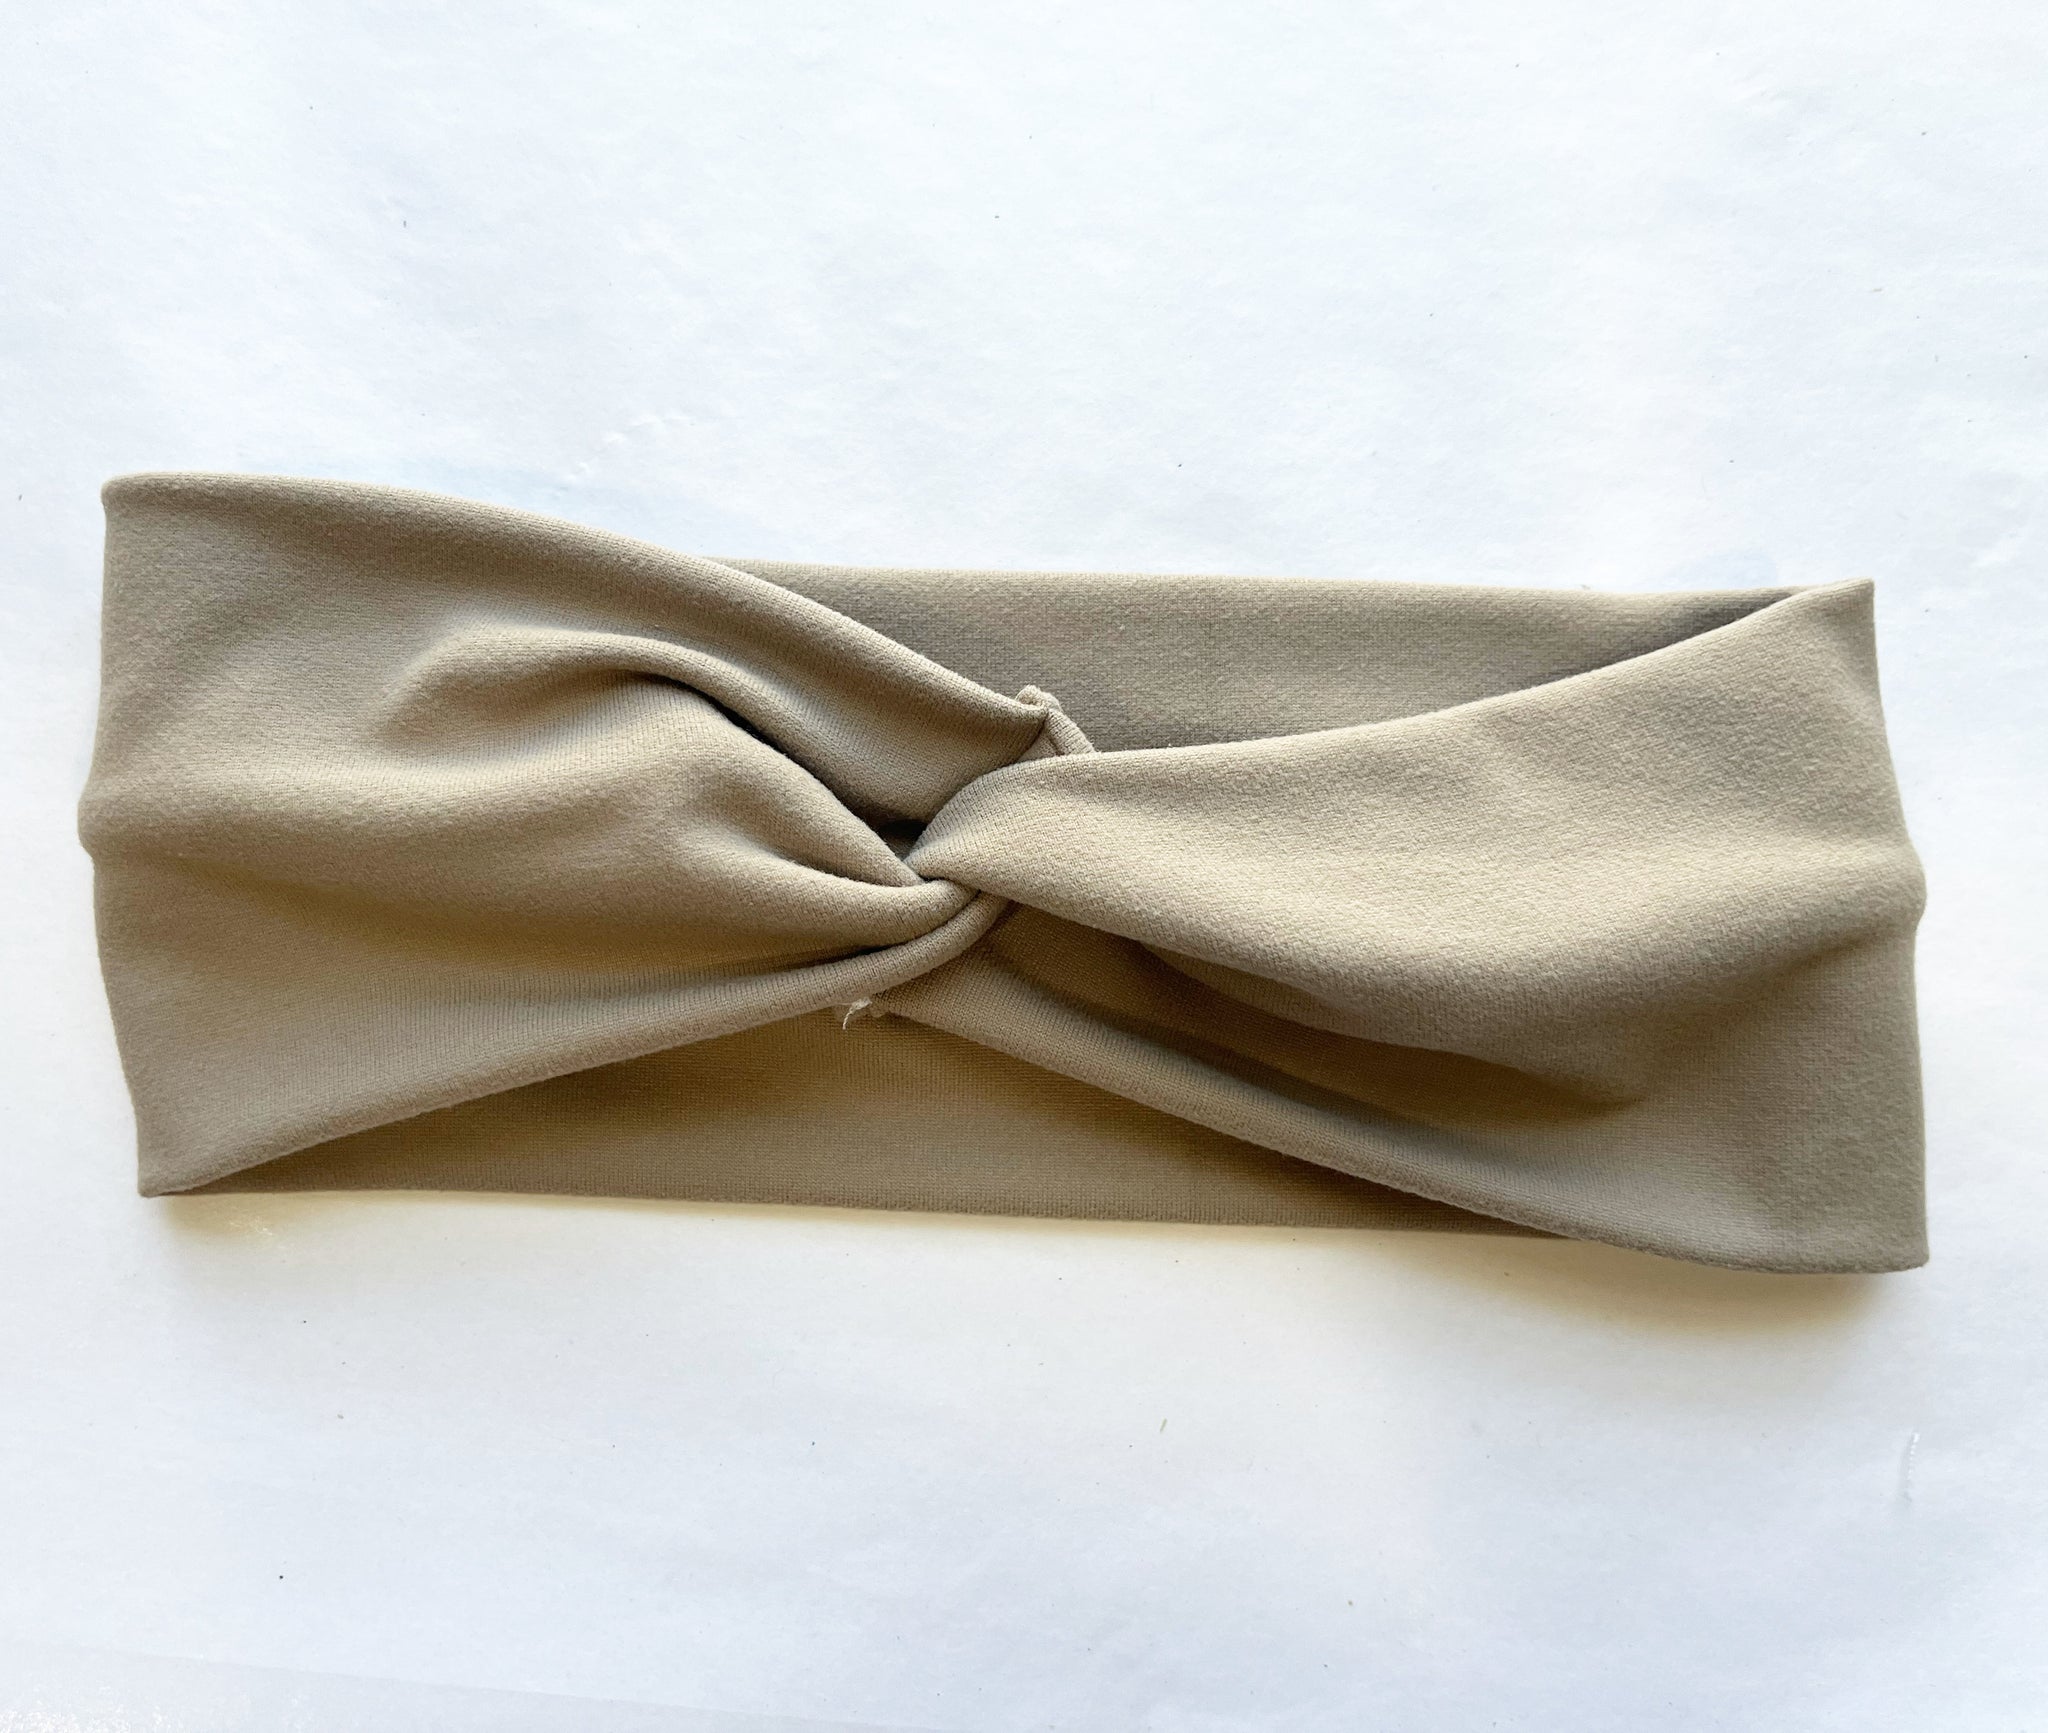 Knotted Headband- Tan, our favorite neutral tone!